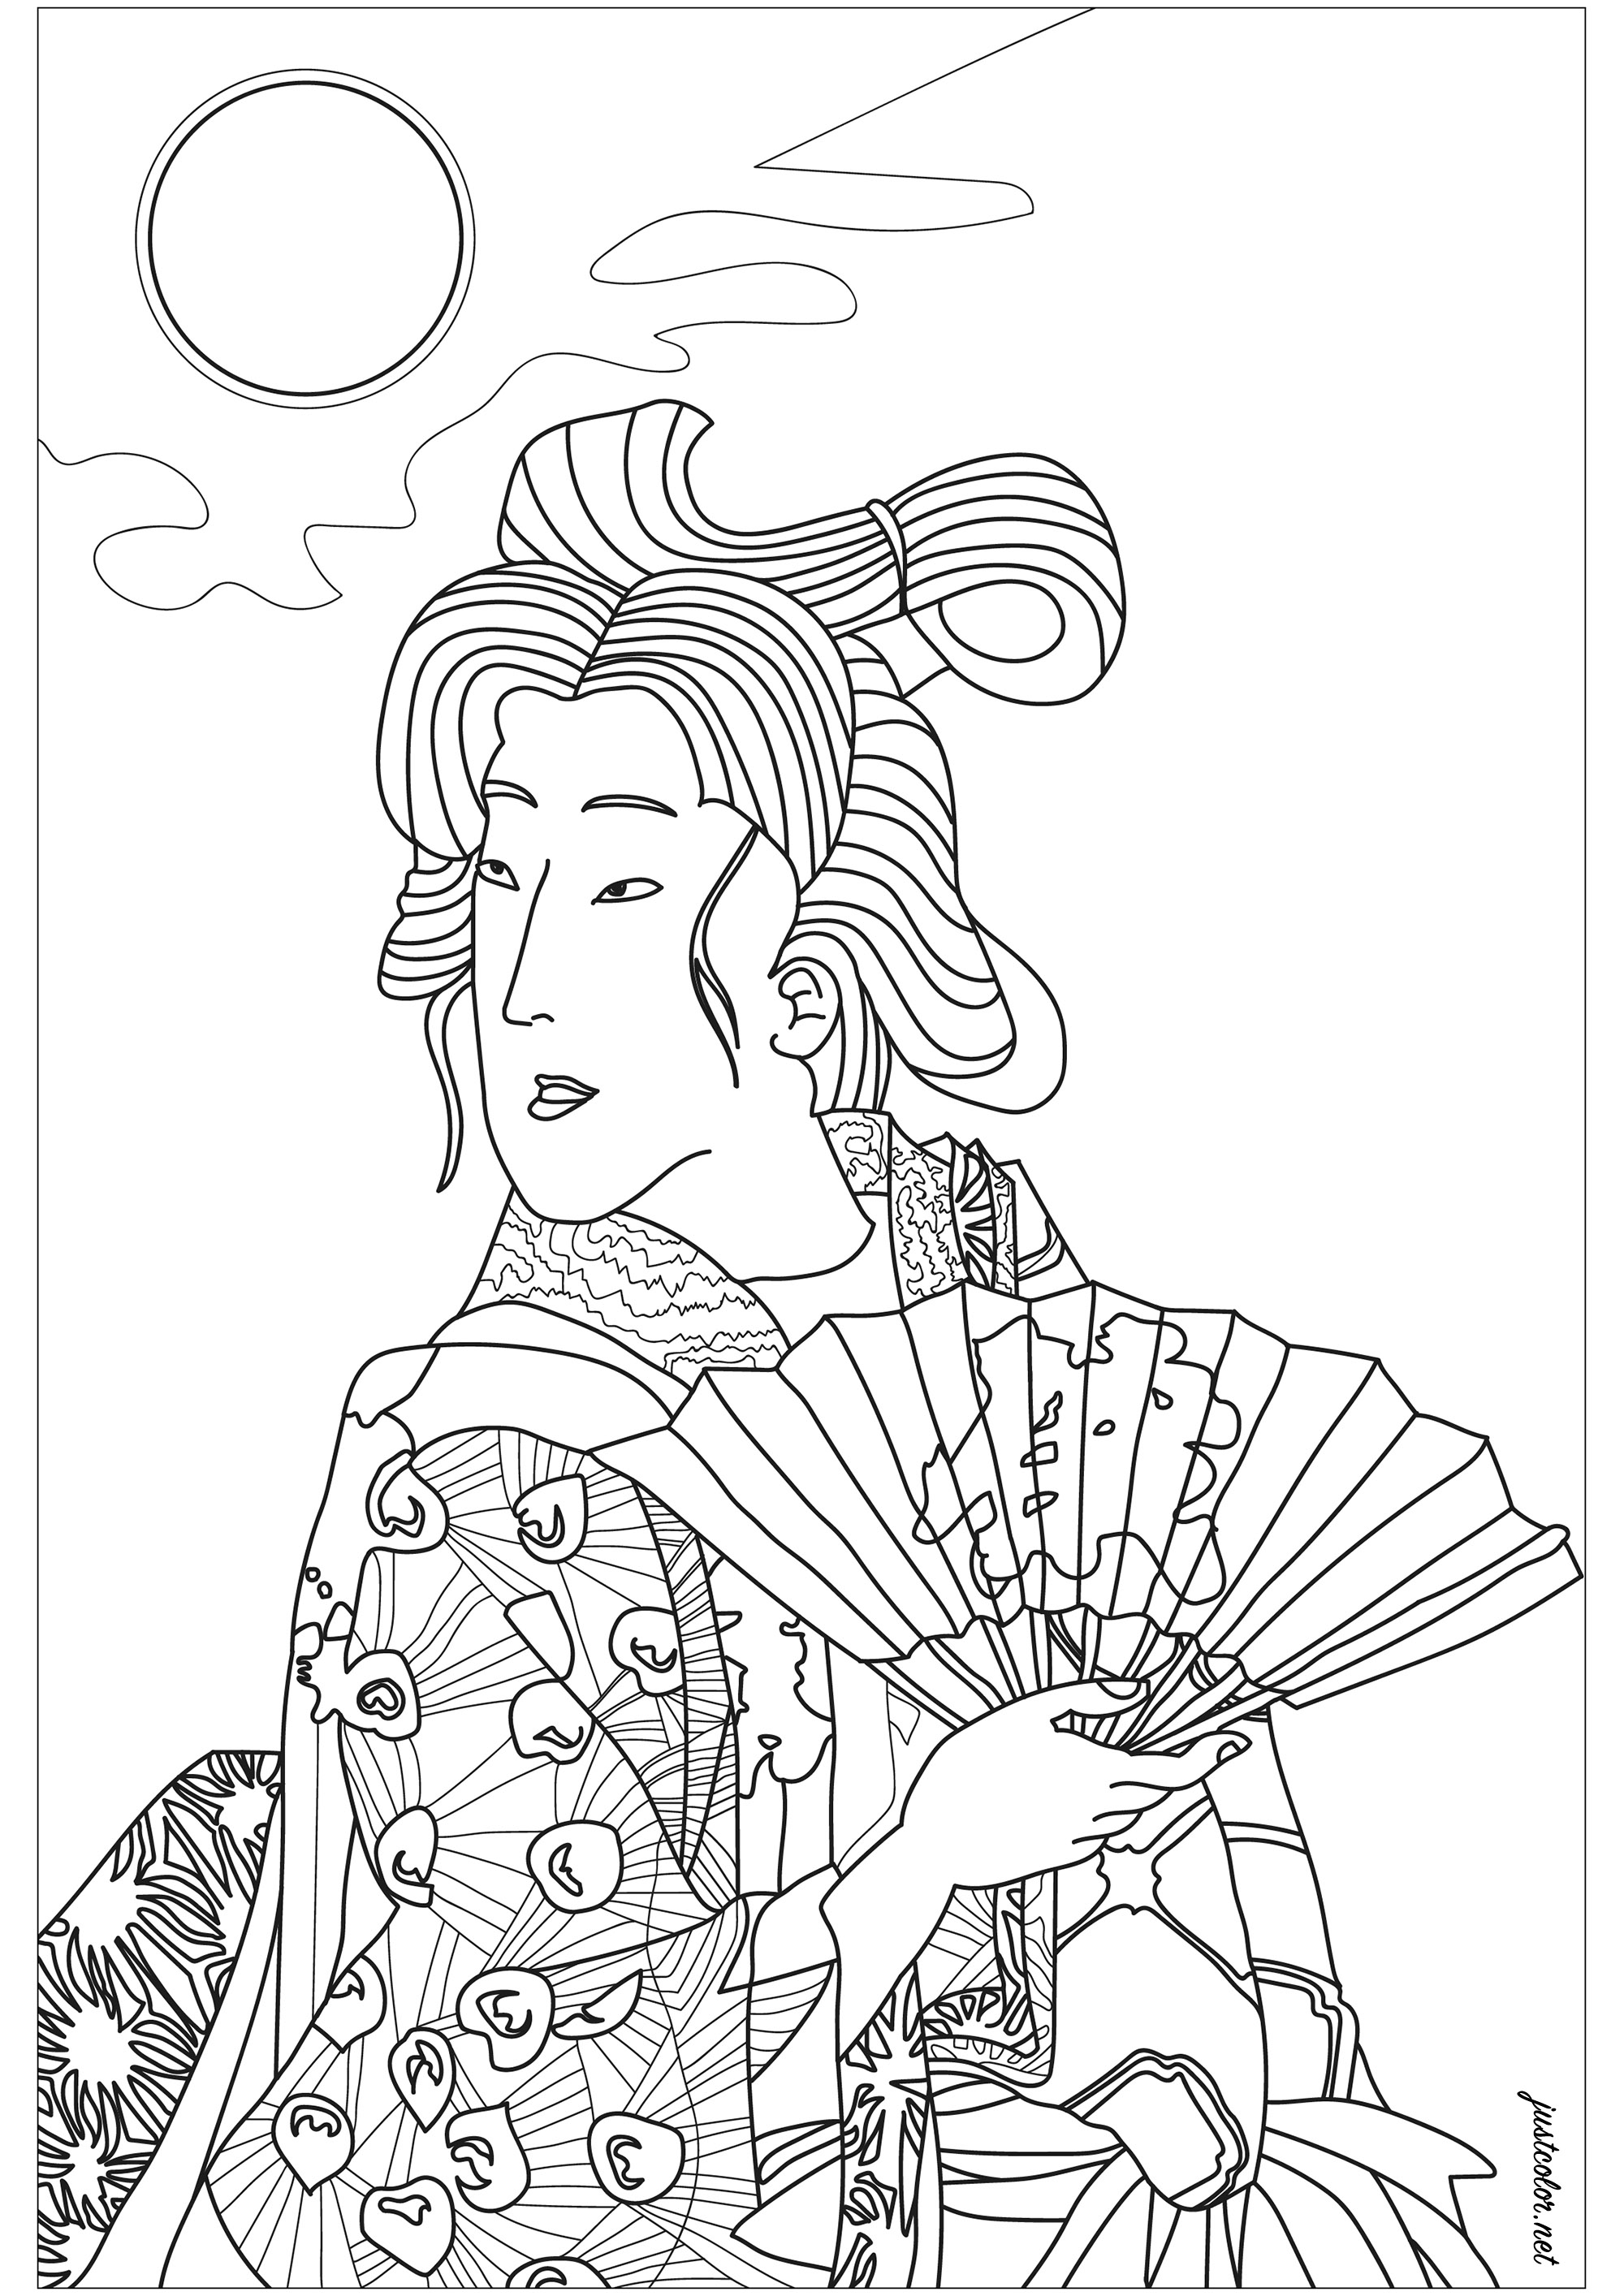 Geisha with fan - Japan Adult Coloring Pages